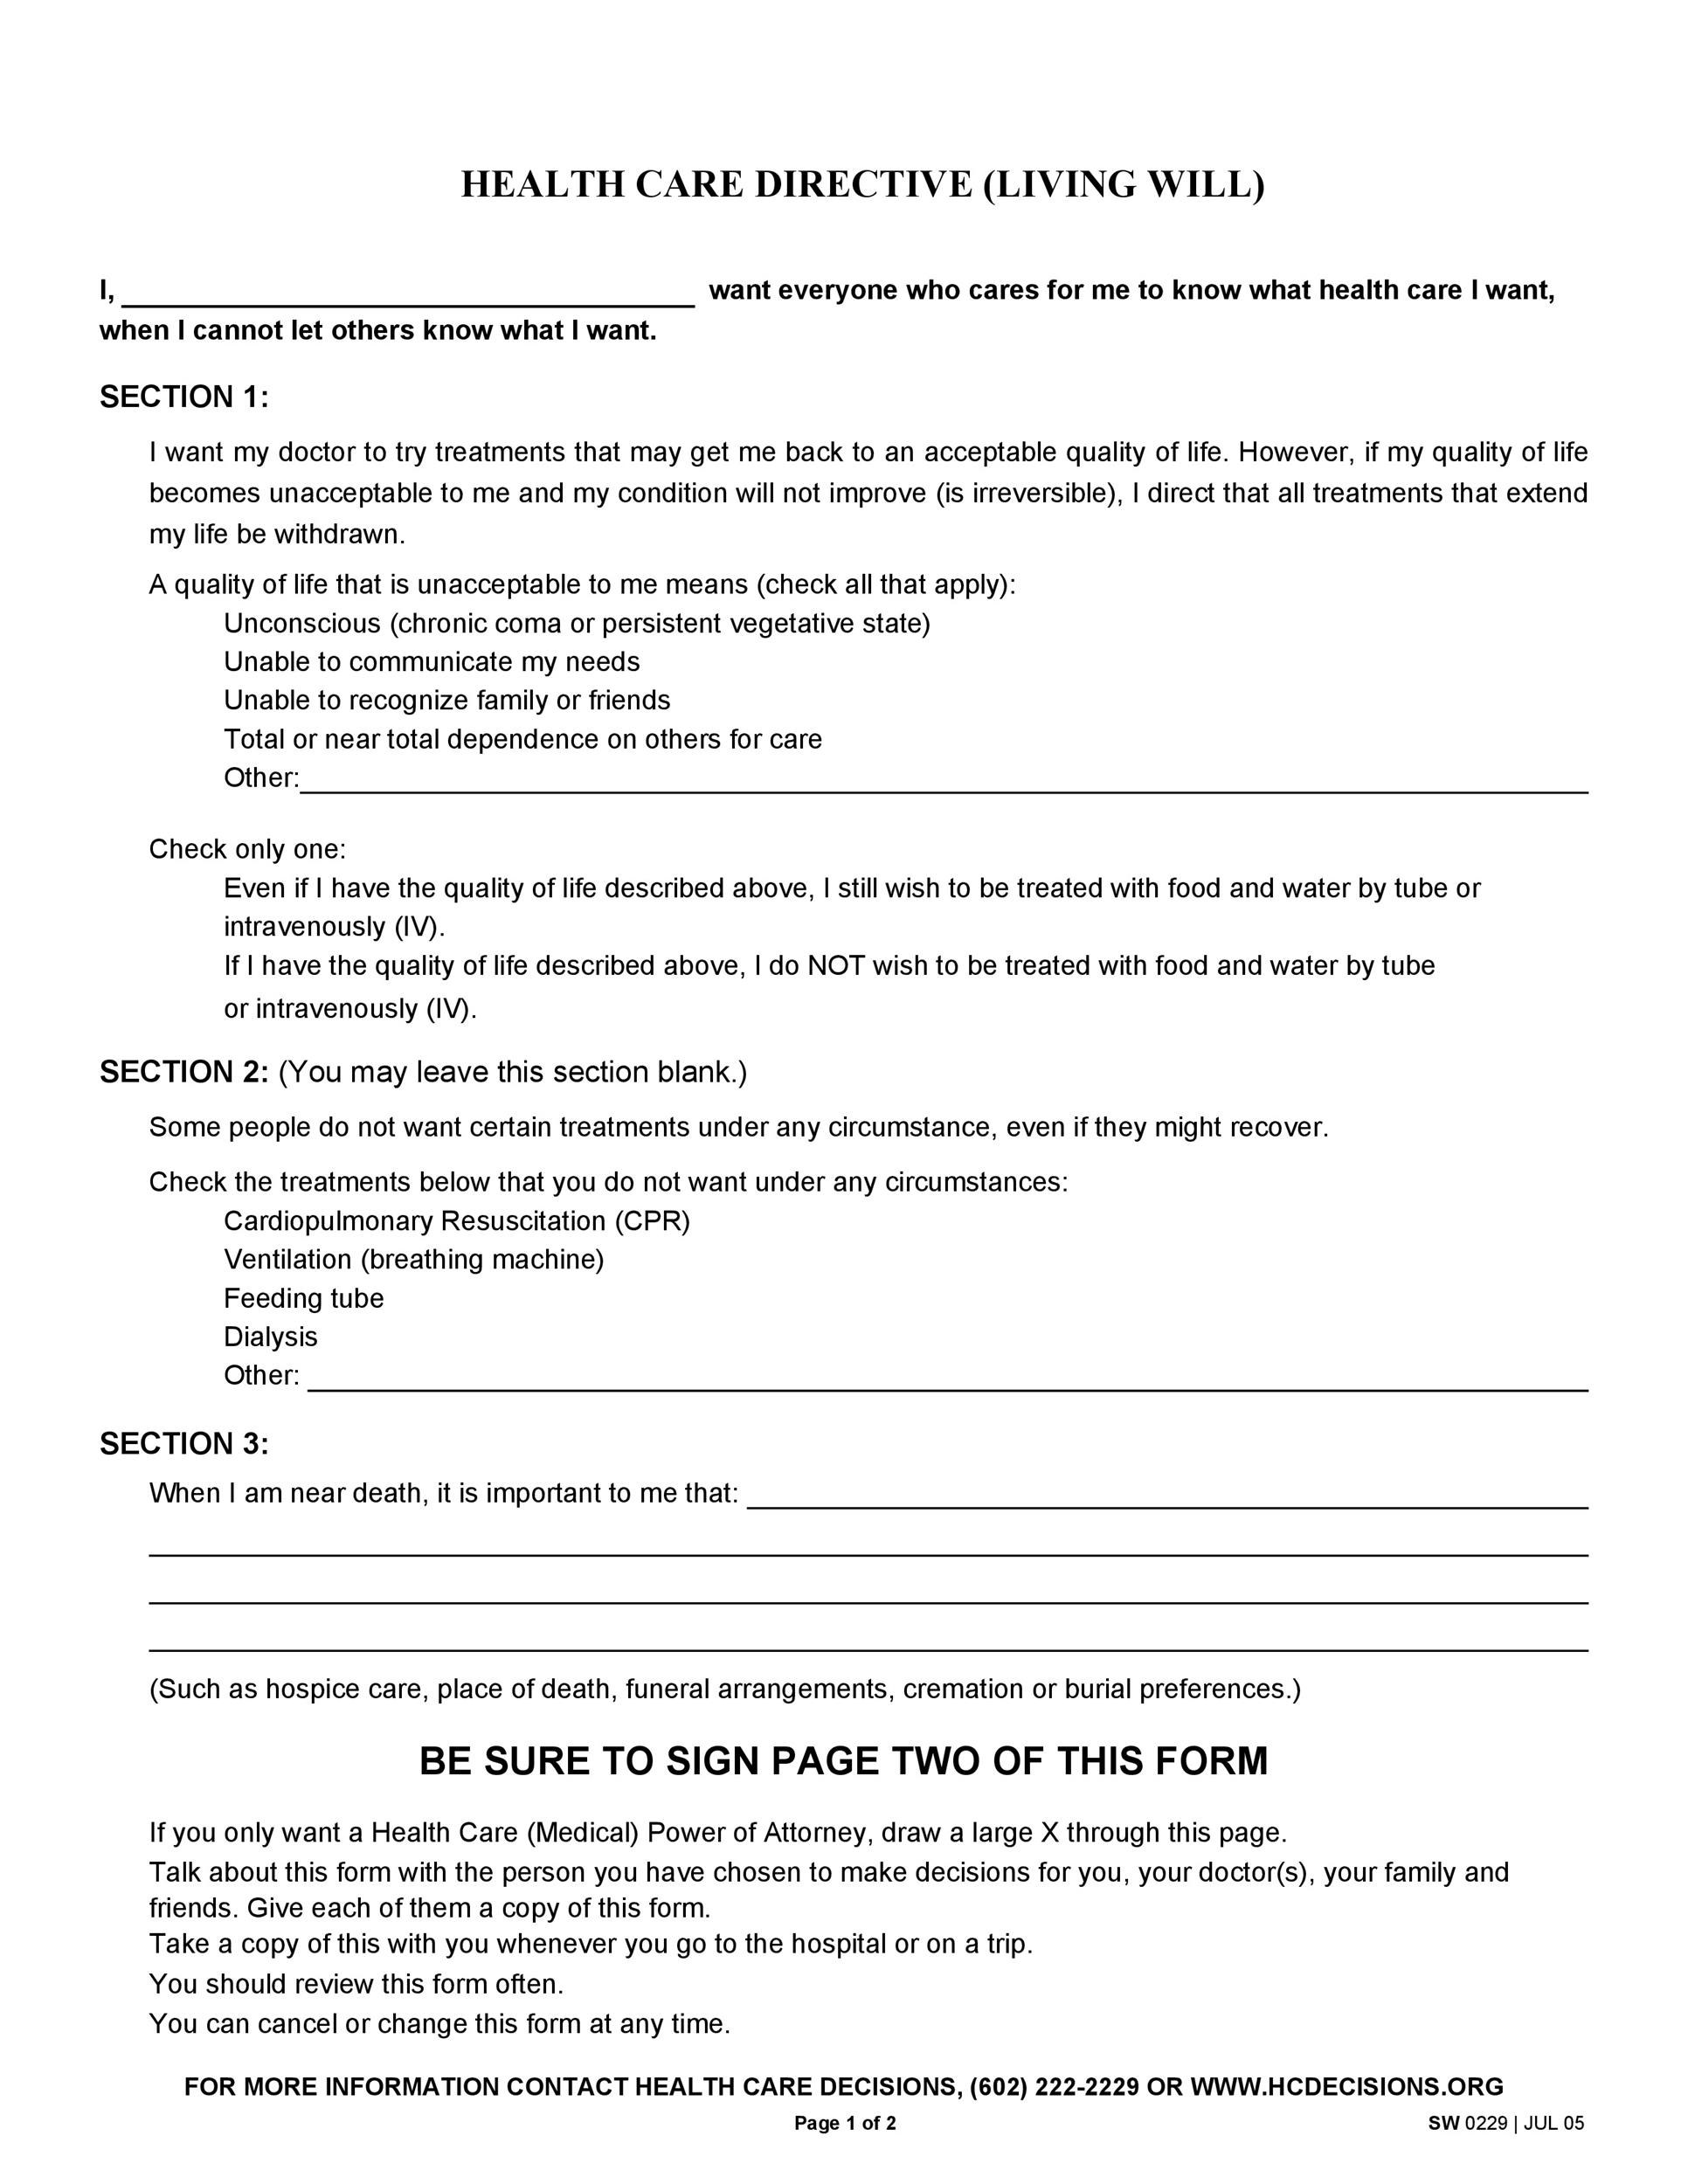 Living Will Printable Forms Printable Forms Free Online